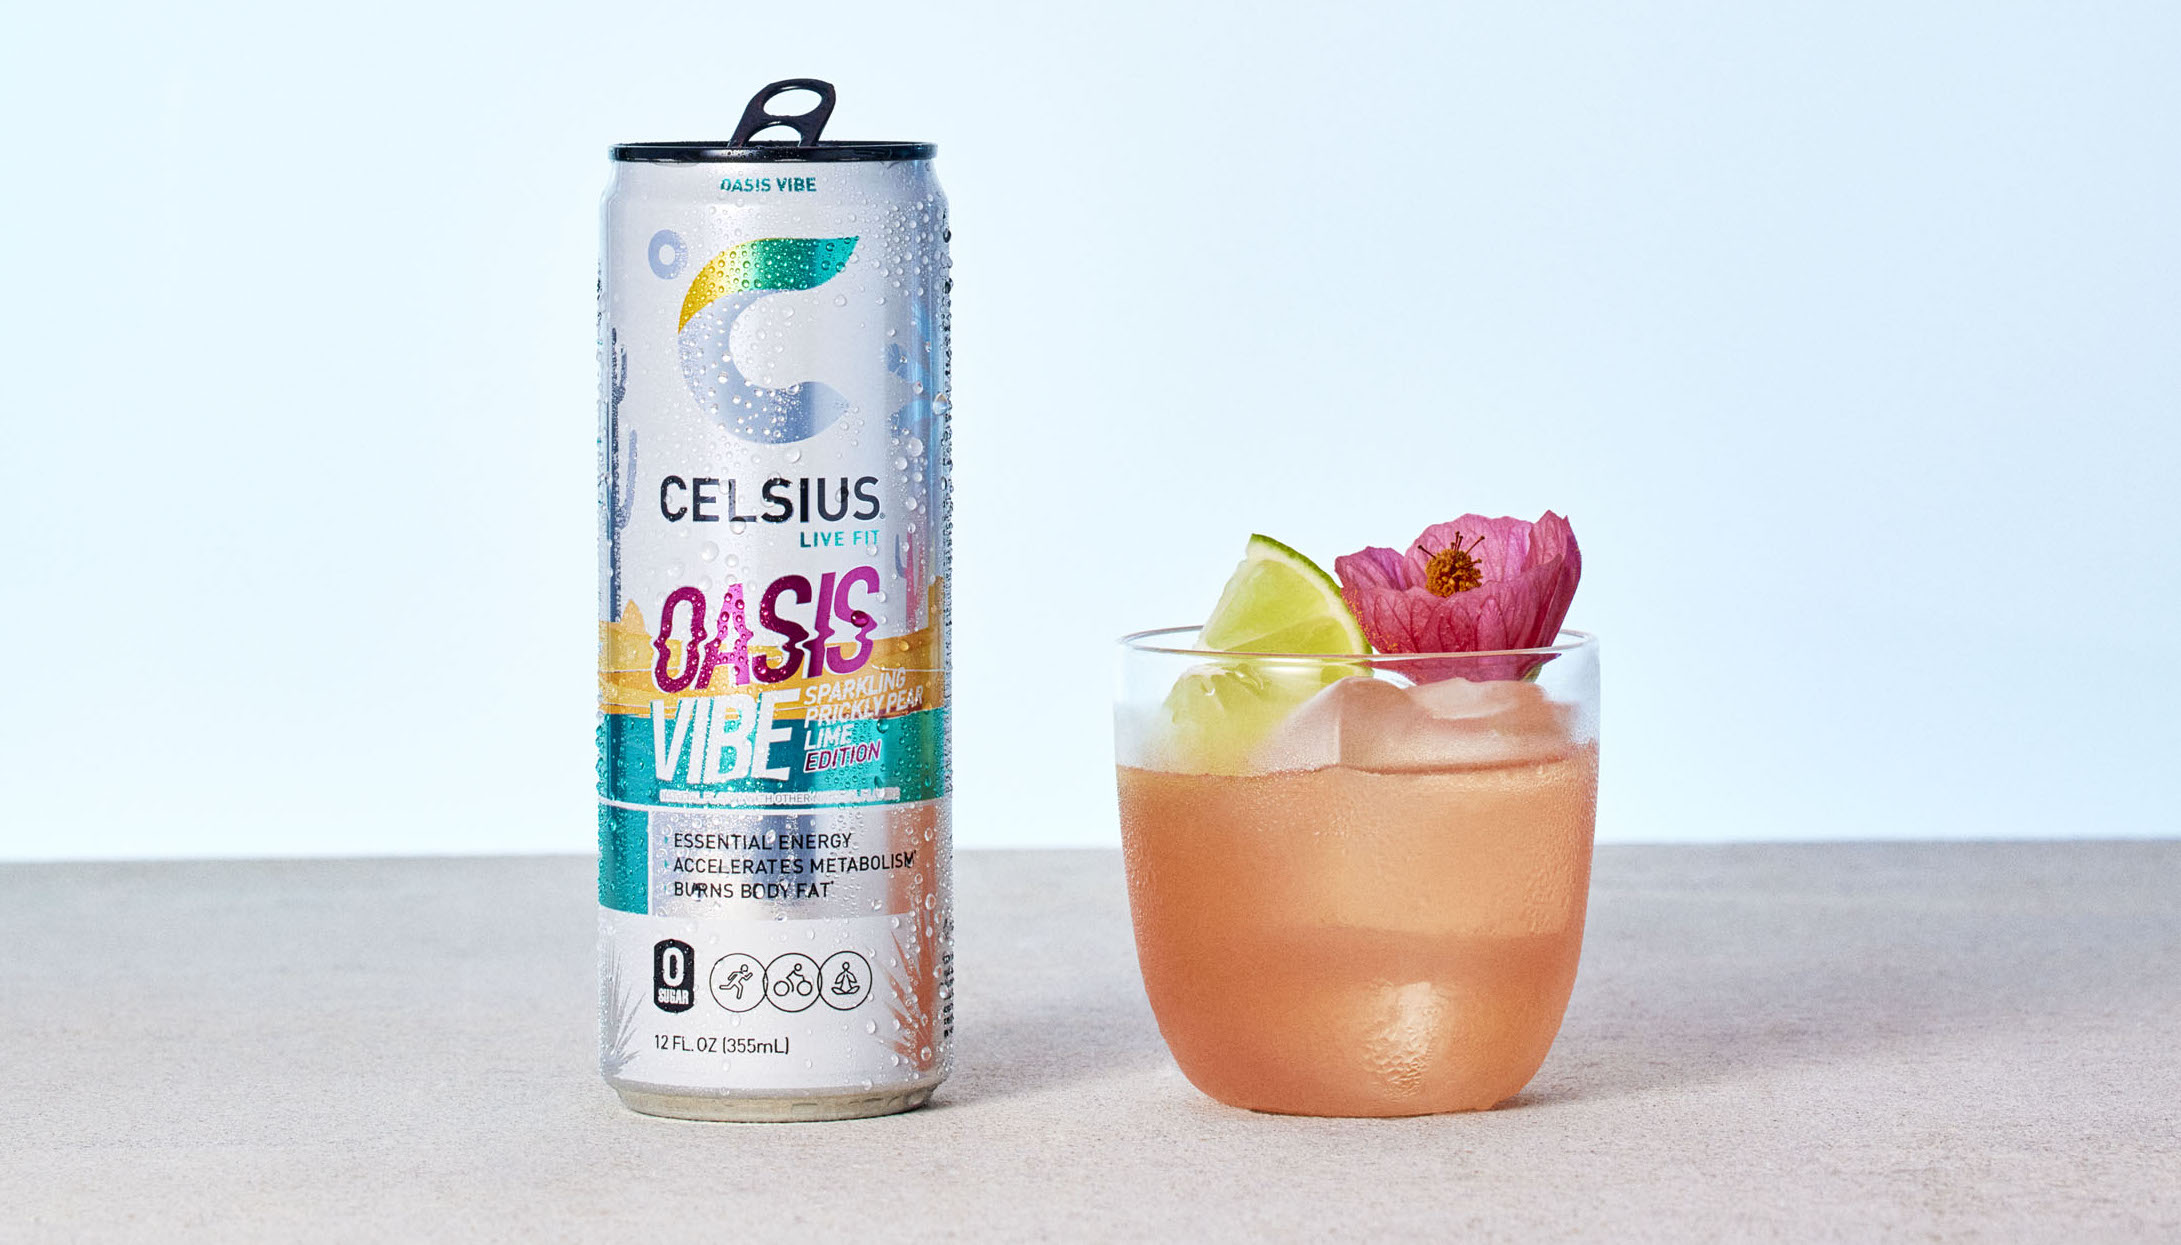 Oasis Vibe Prickly Pear Punch.